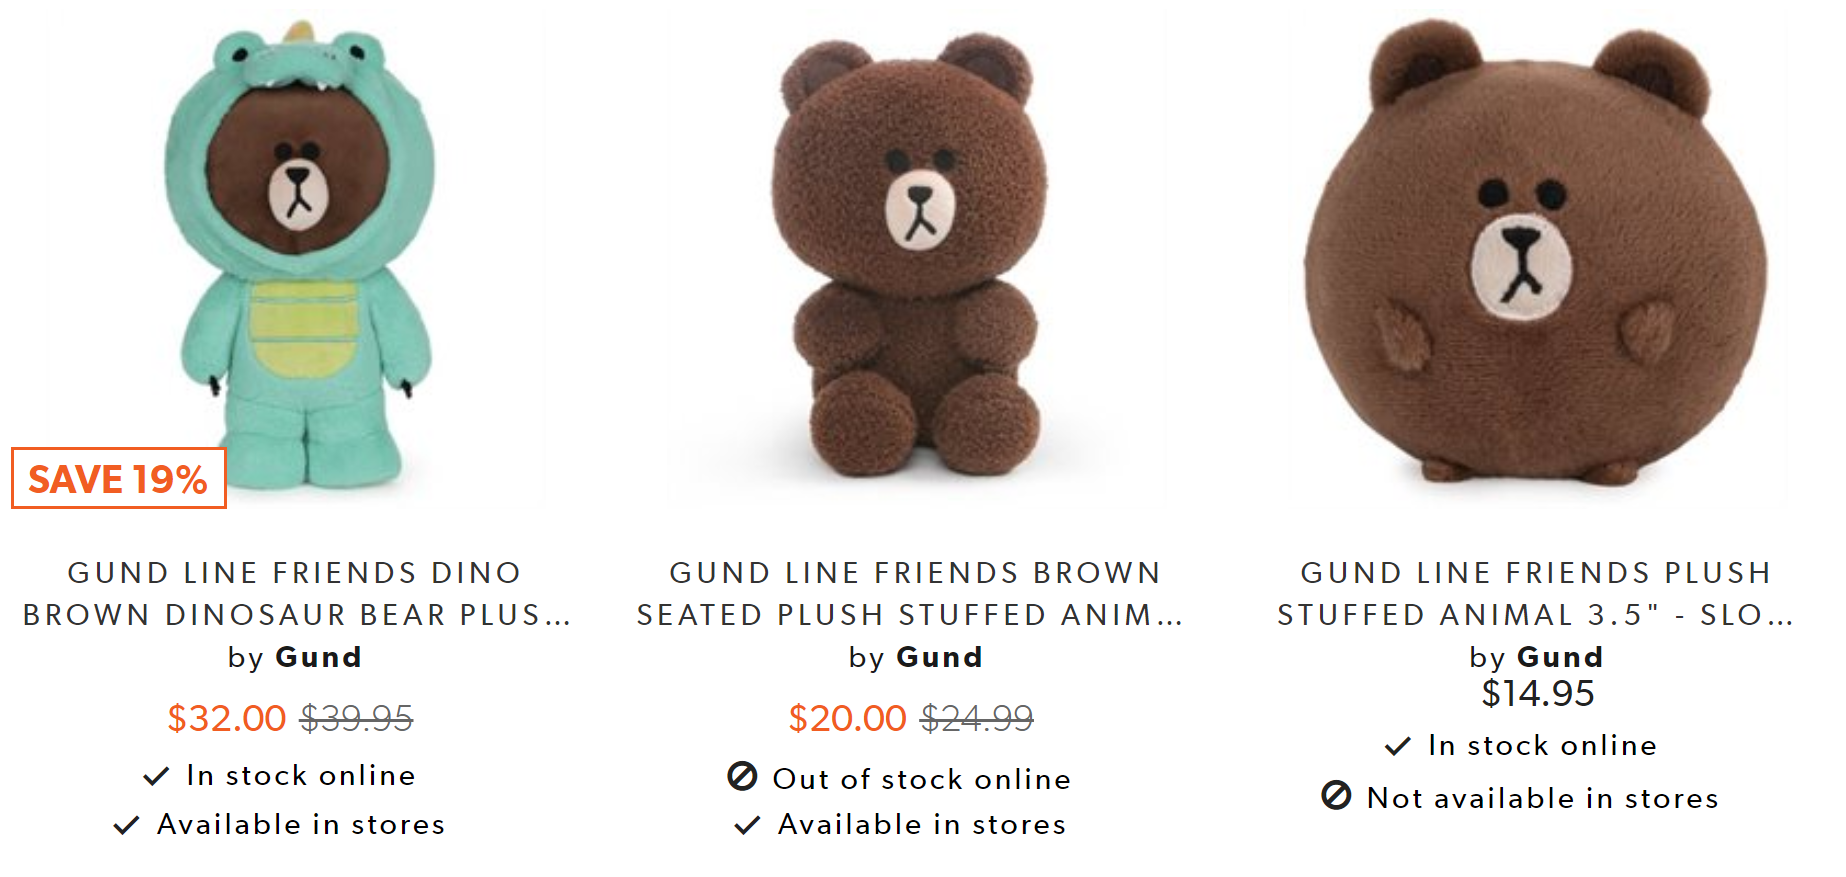 gund-x-line-friends-co-production-plush-toys-as-low-as-20-off-2020-8-25